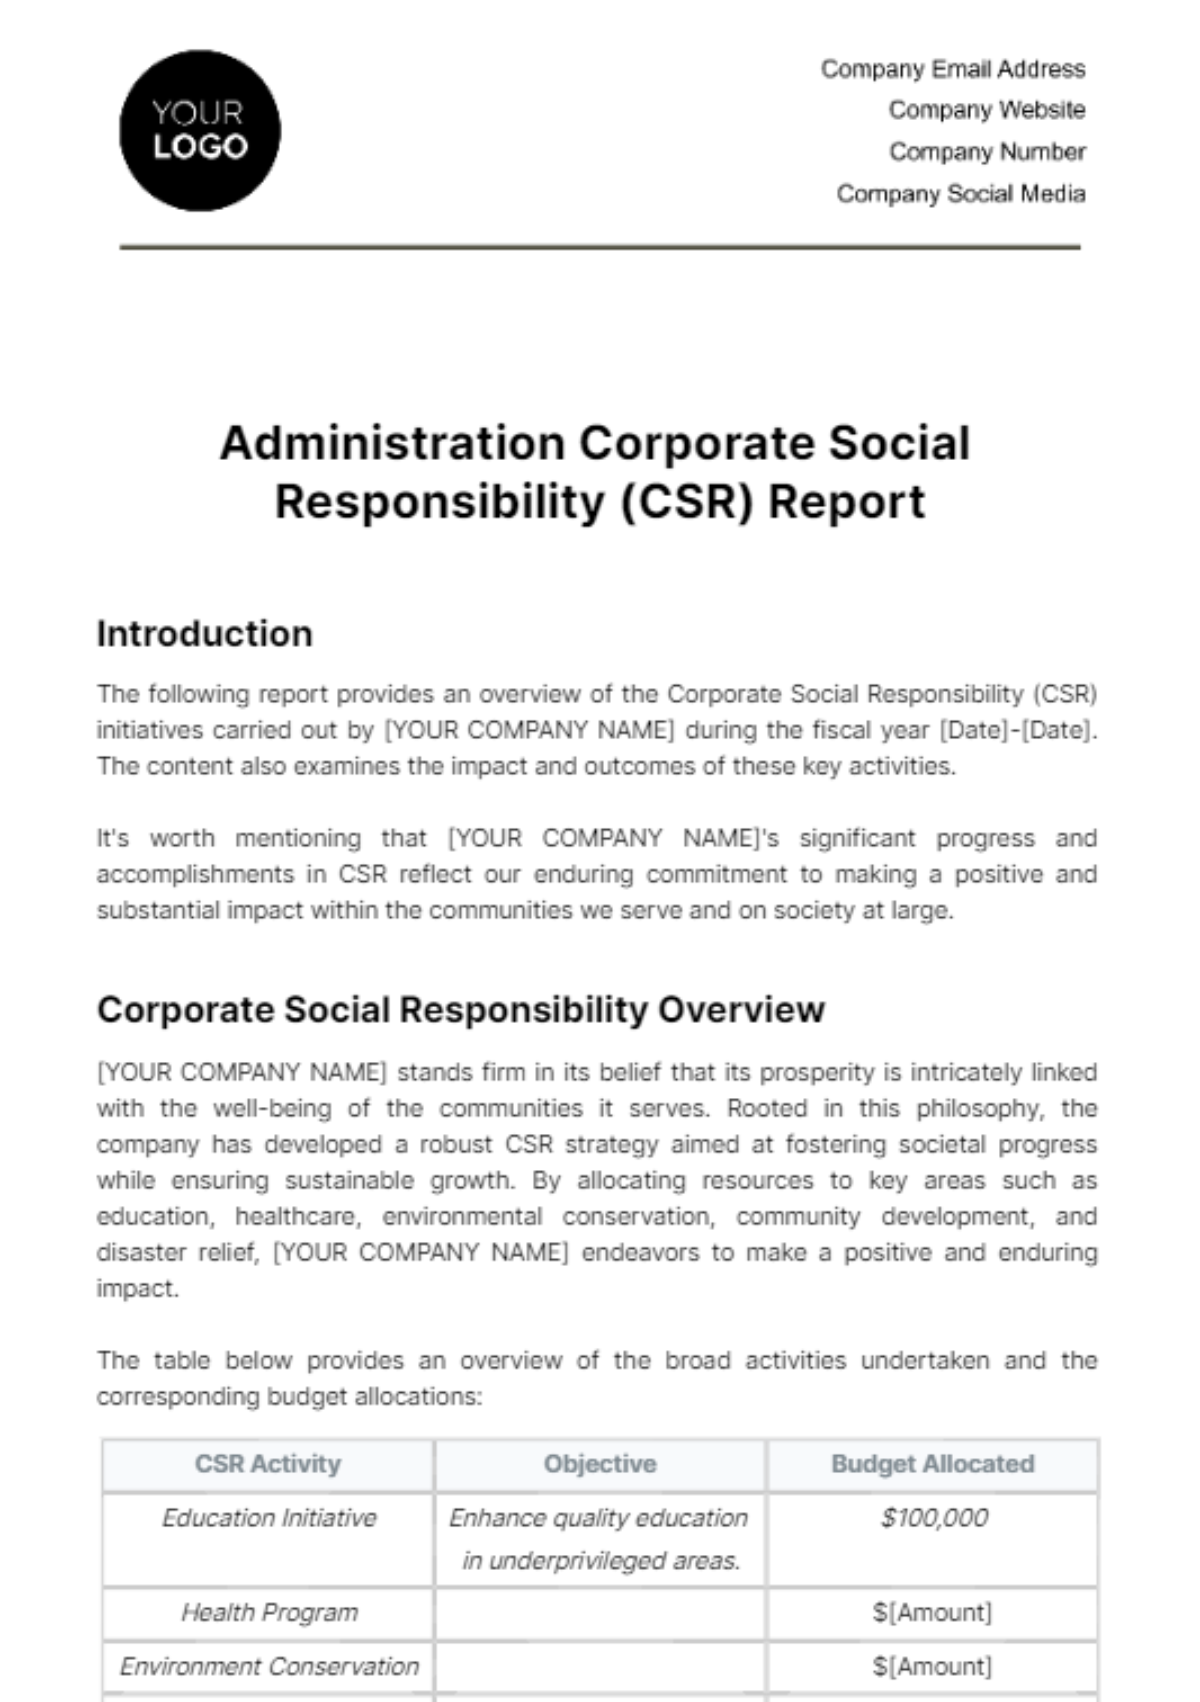 Free Administration Corporate Social Responsibility (CSR) Report Template